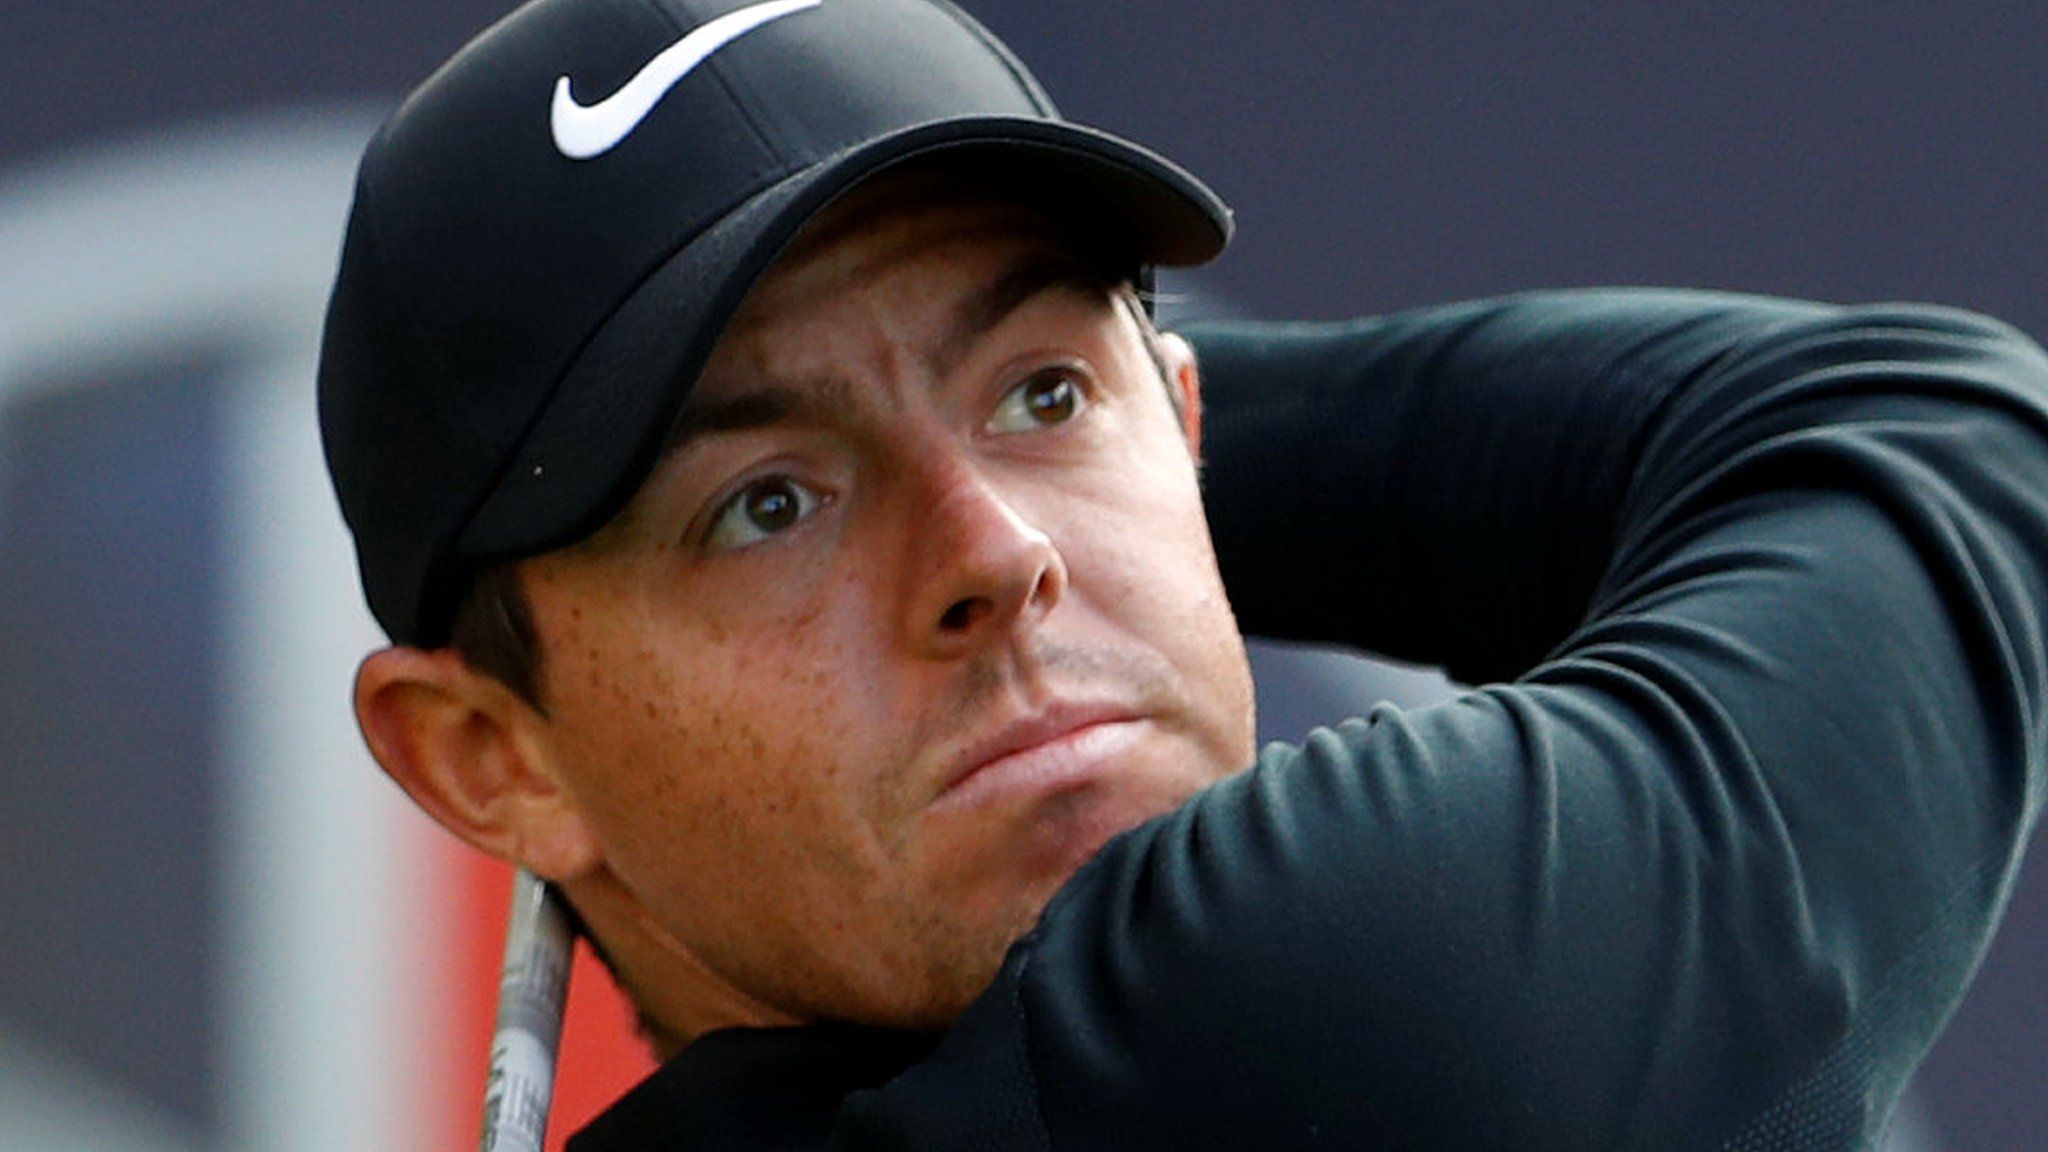 Rory McIlroy is currently sixth in the world rankings